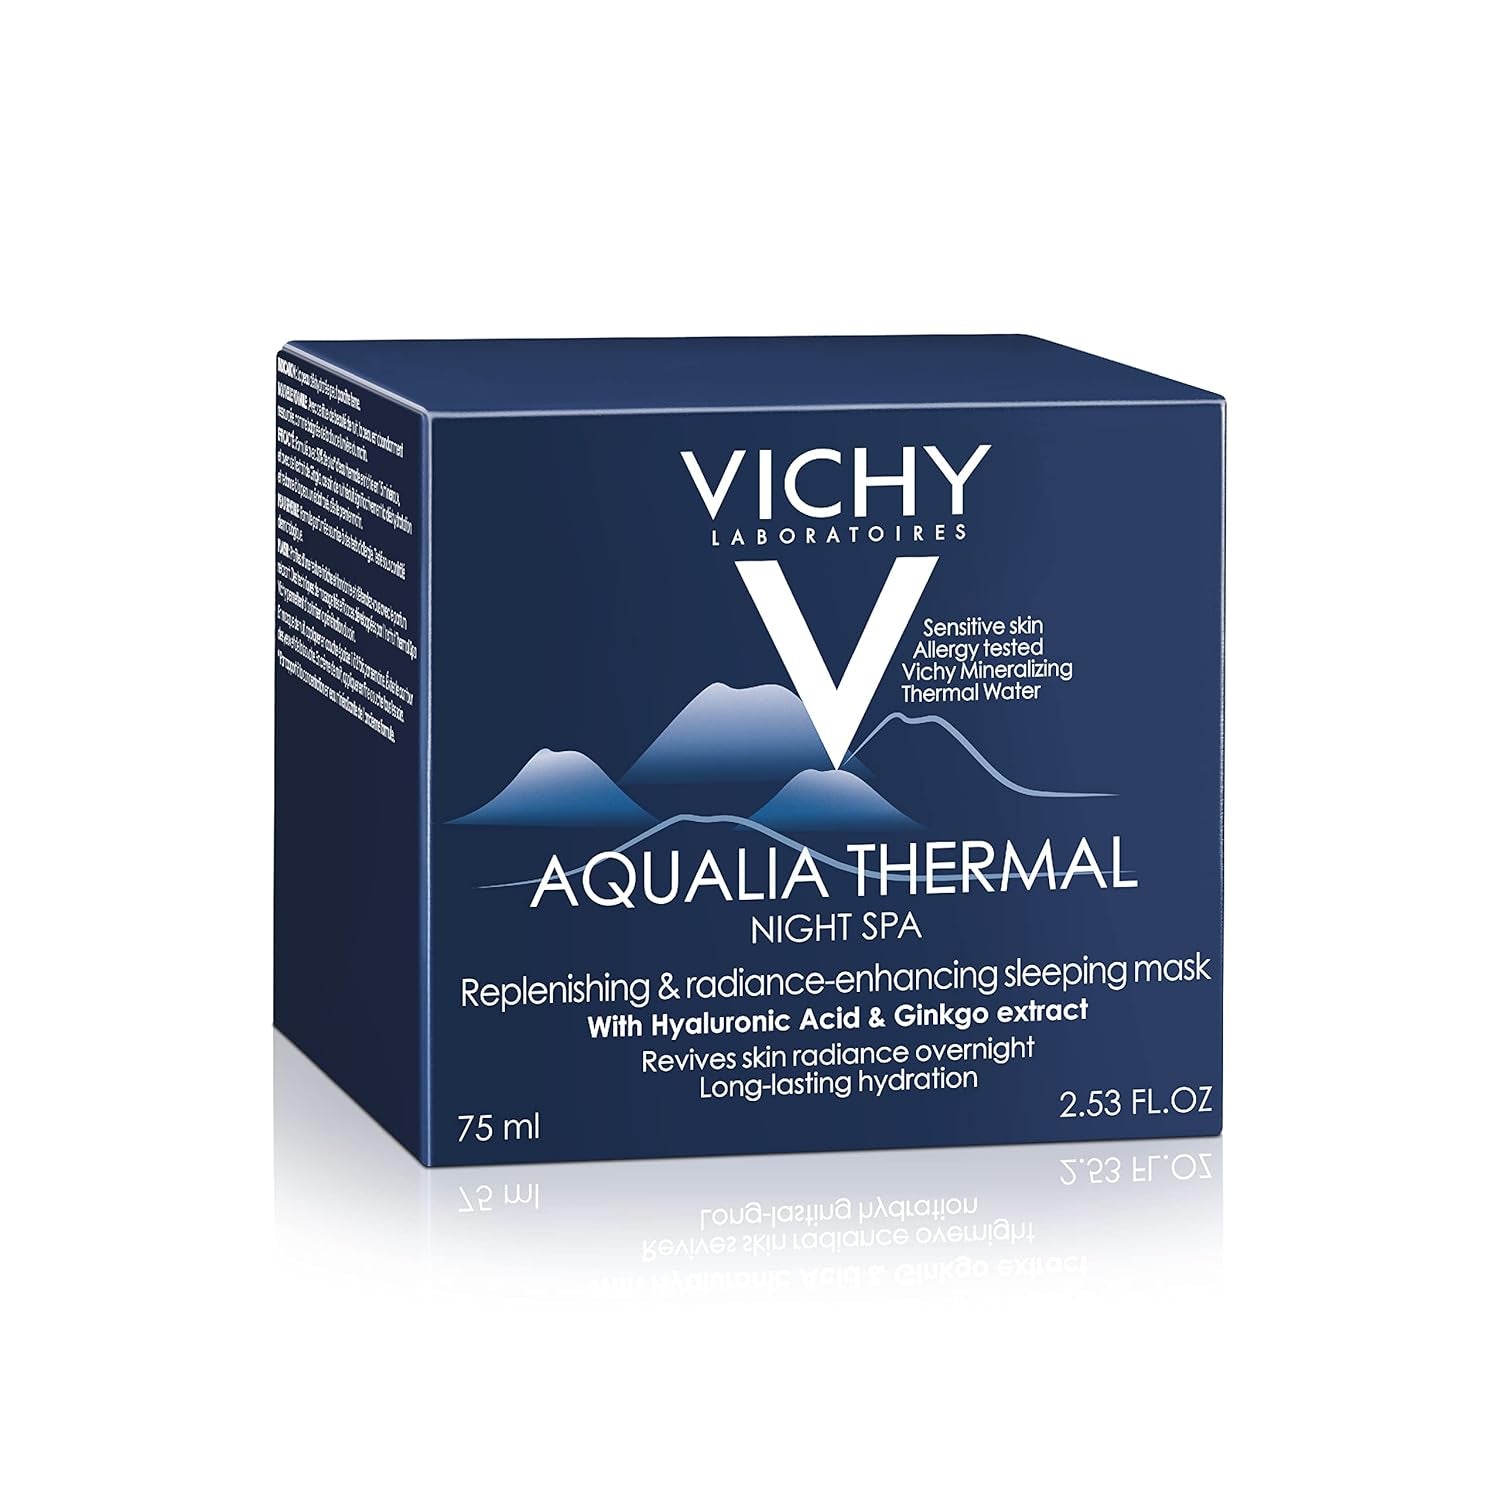 "Vichy Aqualia Thermal Spa Night Cream and Overnight Mask - Hydrating Face Moisturizer with Hyaluronic Acid, Anti-Wrinkle Formula, Lightly Scented, Paraben-Free"